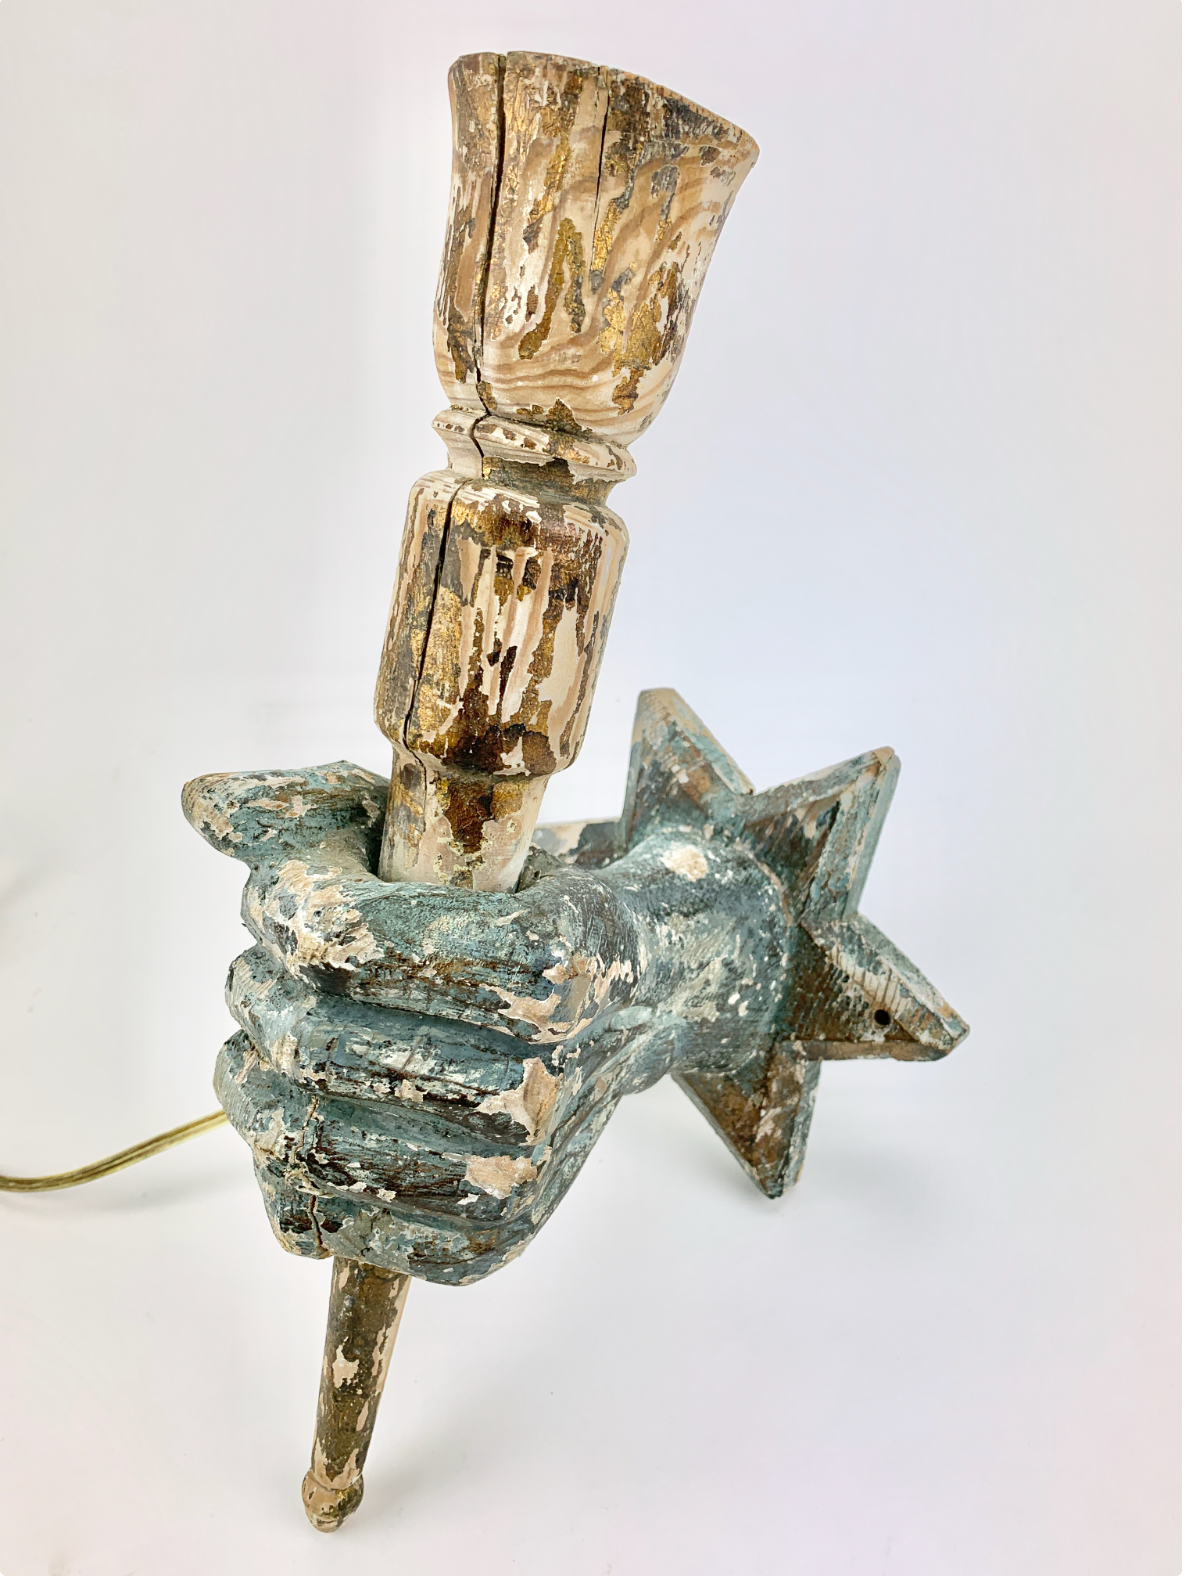 Jean Cocteau [Igor Stravinsky]  Wooden Hand Torch Candelabra Sconce from the Stravinsky Collection, ca. 1940